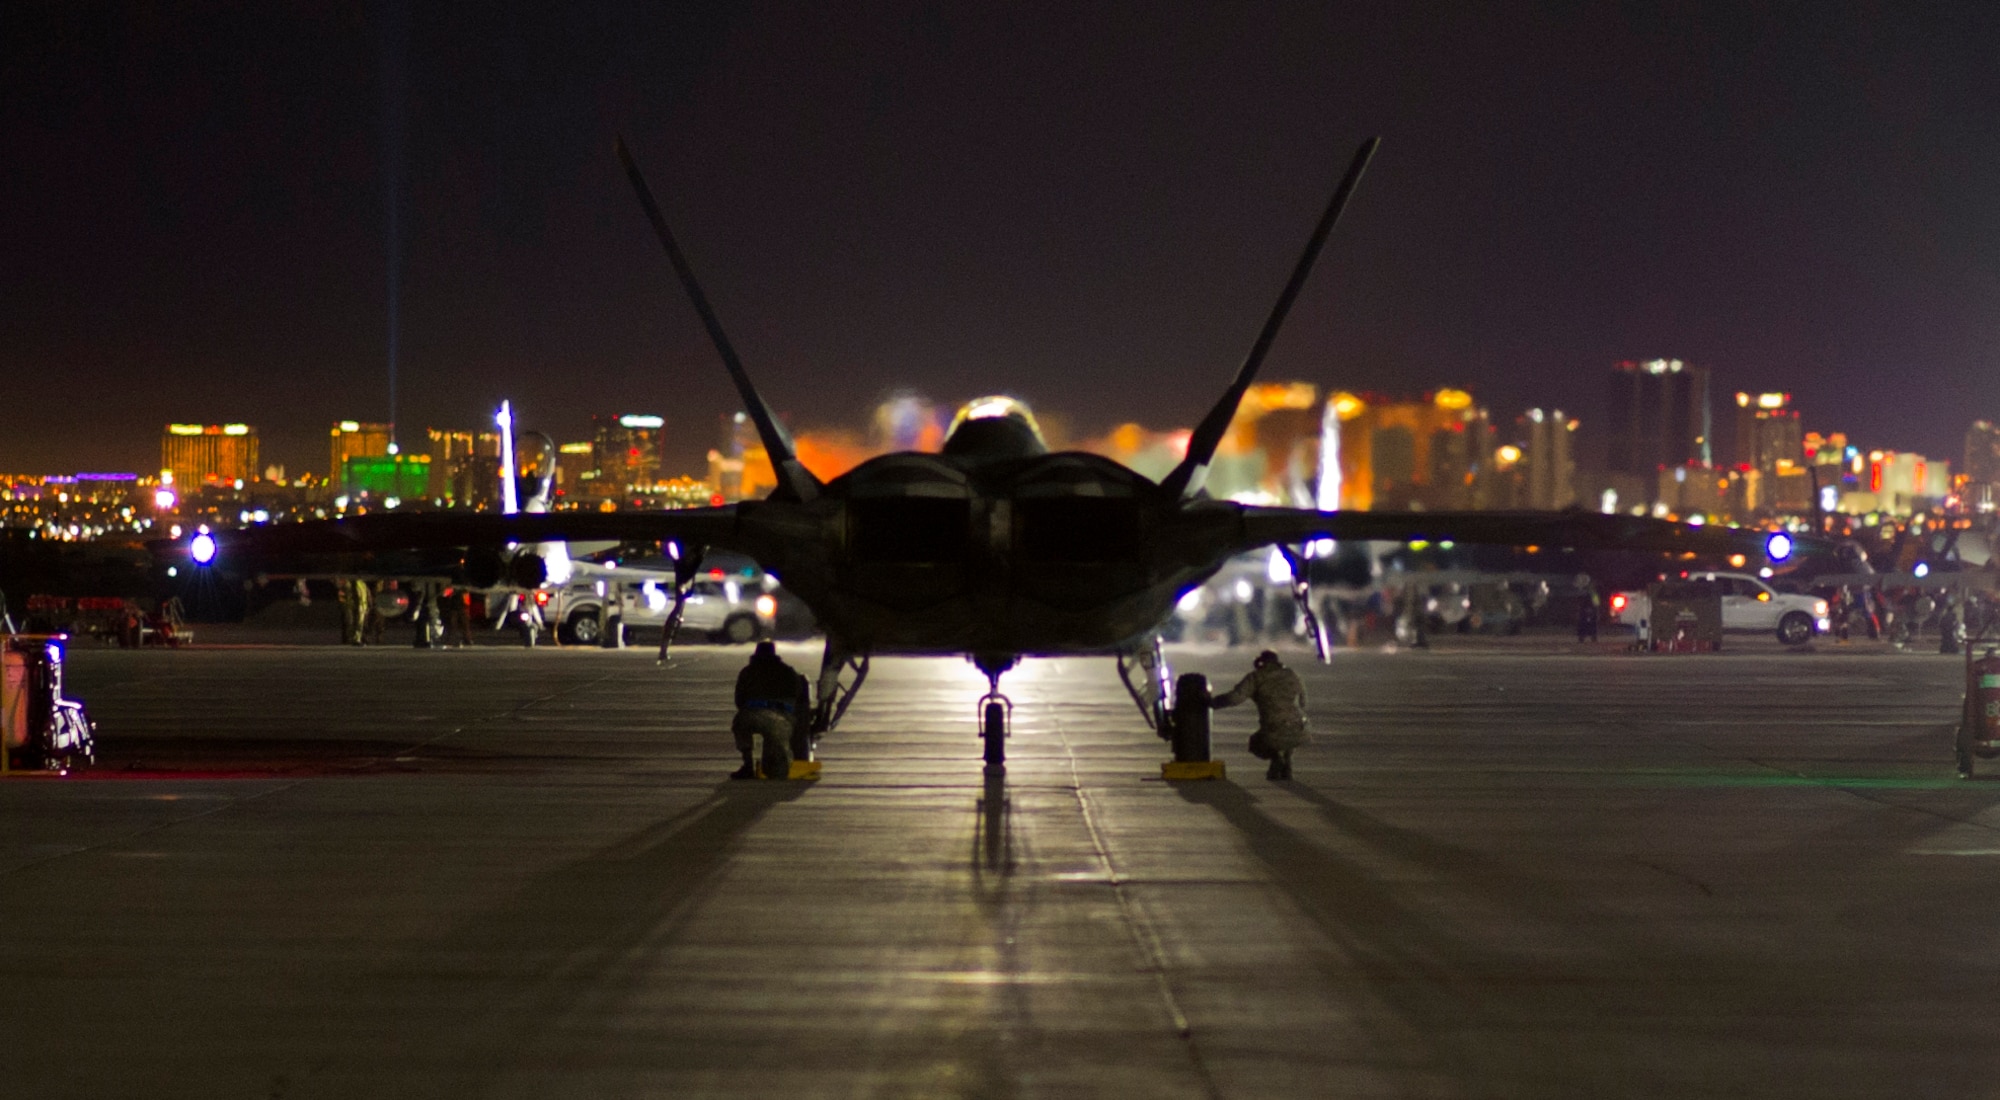 An F-22 Raptor from Tyndall Air Force Base, Fla., is ready to taxi and take off during Red Flag 16-1, Jan. 26, 2016, at Nellis AFB, Nev. Tyndall’s F-22s brought a lot to the exercise as the jet’s stealth capabilities, advanced avionics, communication and sensory capabilities help augment the capabilities of the other aircraft. (U.S. Air Force photo/Senior Airman Alex Fox Echols III)